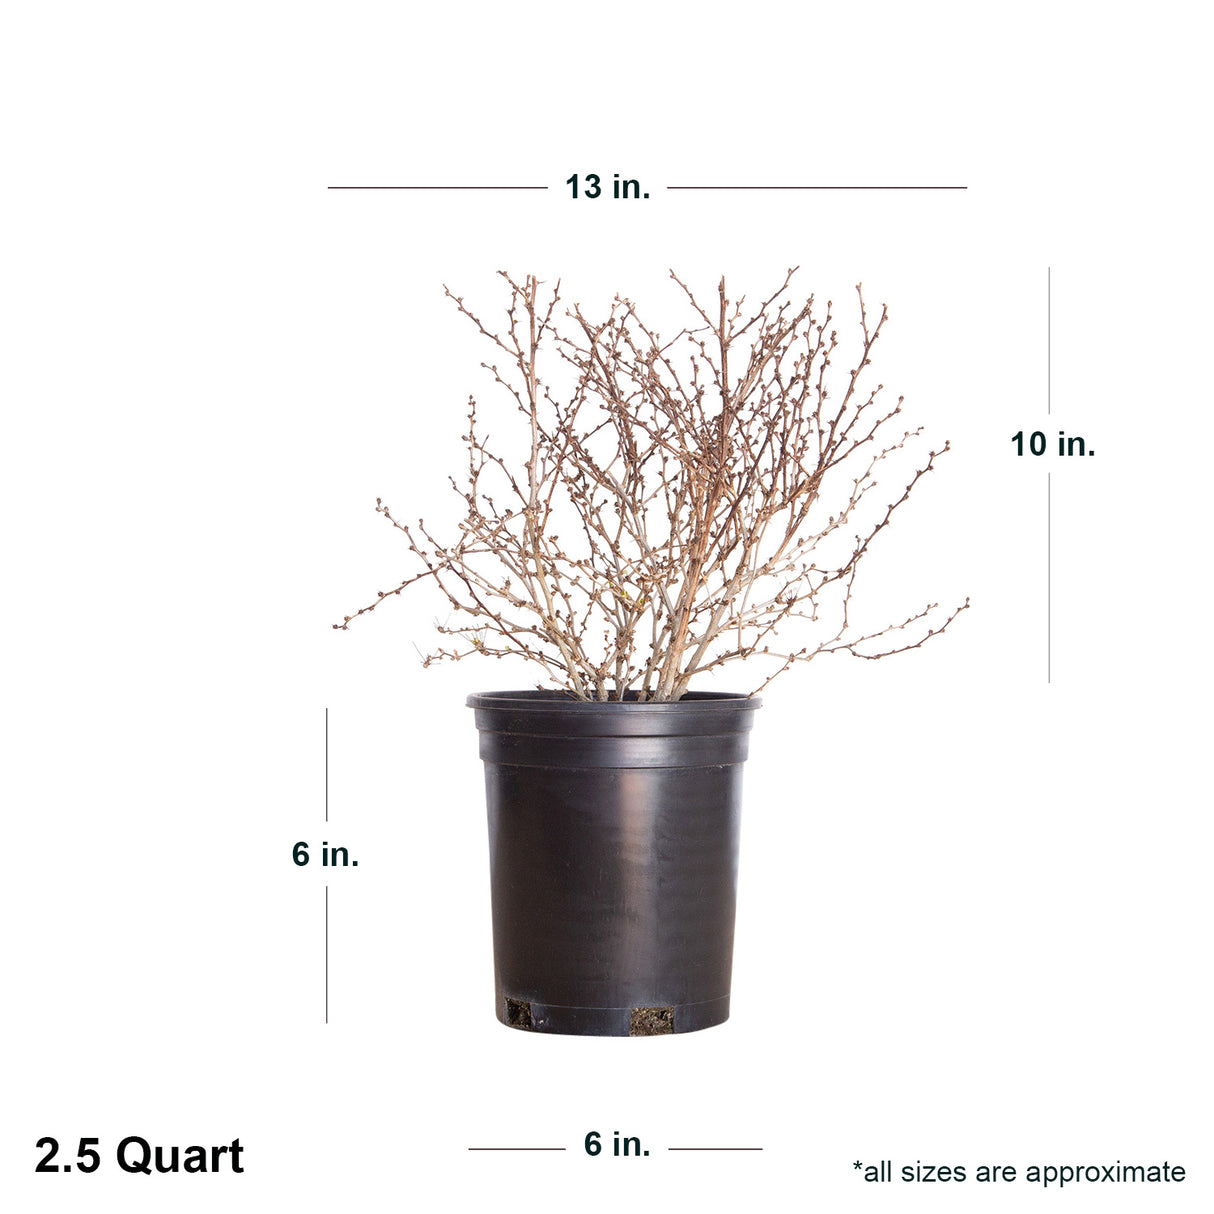 2.5 Quart Rose Glow Barberry dormant in black container showing dimensions.